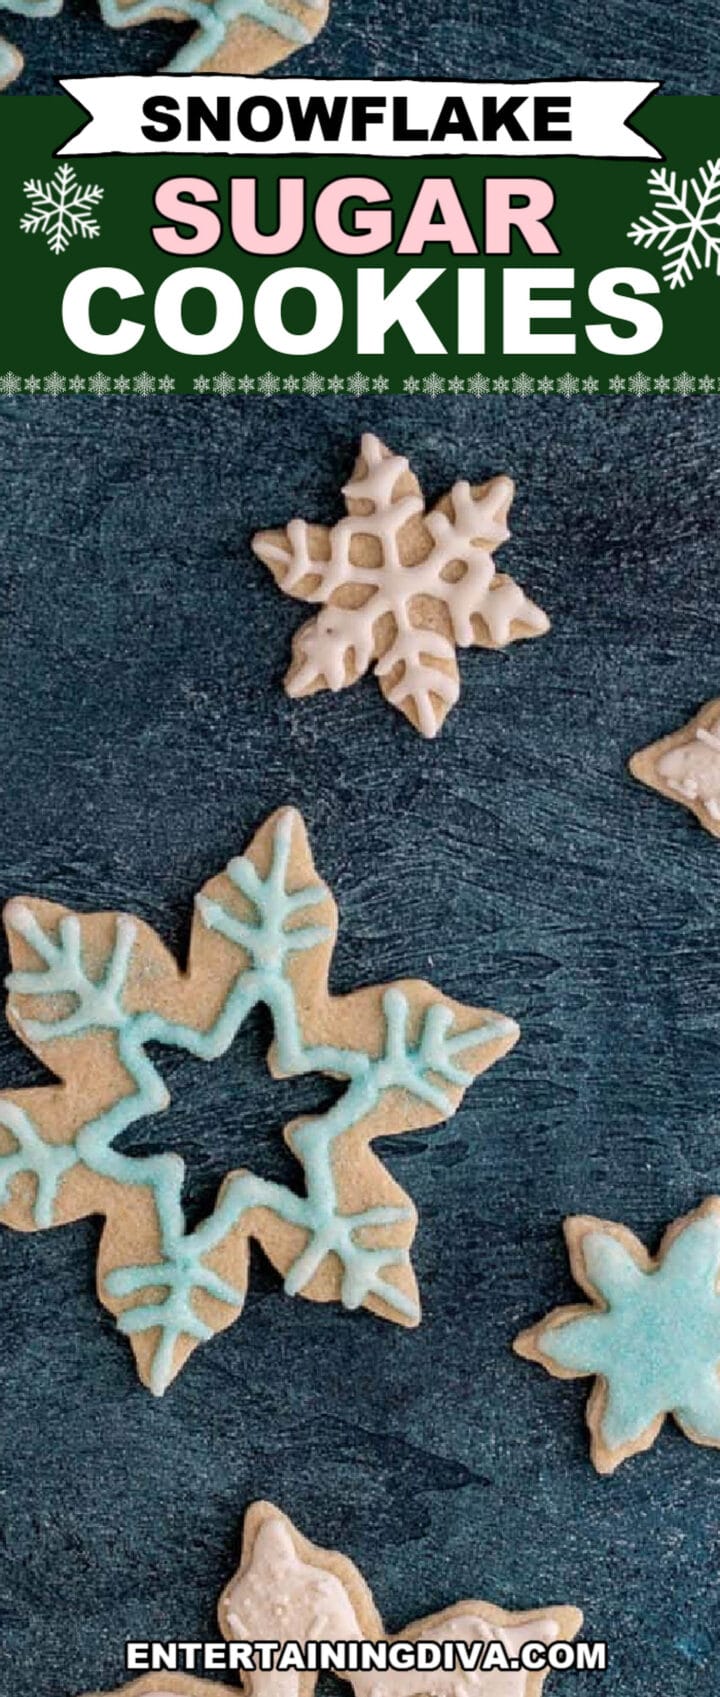 Snowflake sugar cookies with text.